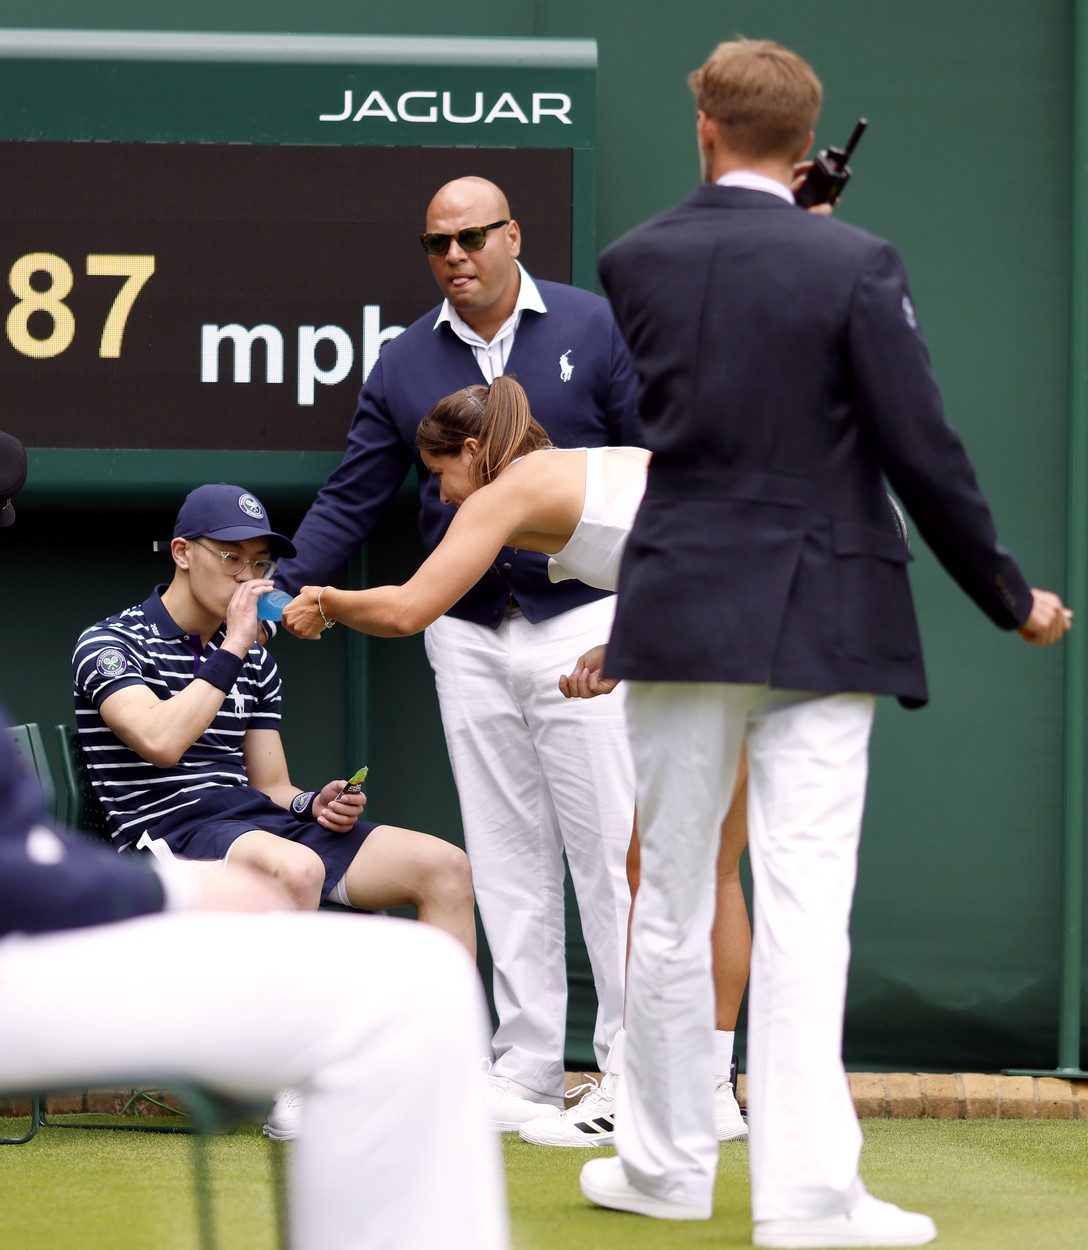 Jodie Burrage helps a ball boy after they fainted during her Ladies' singles first round match against Lesia Tsurenko during day one of the 2022 Wimbledon Championships at the All England Lawn Tennis and Croquet Club, Wimbledon. Picture date: Monday June 27, 2022.,Image: 703167984, License: Rights-managed, Restrictions: Editorial use only. No commercial use without prior written consent of the AELTC. Still image use only - no moving images to emulate broadcast. No superimposing or removal of sponsor/ad logos., Model Release: no, Credit line: Profimedia